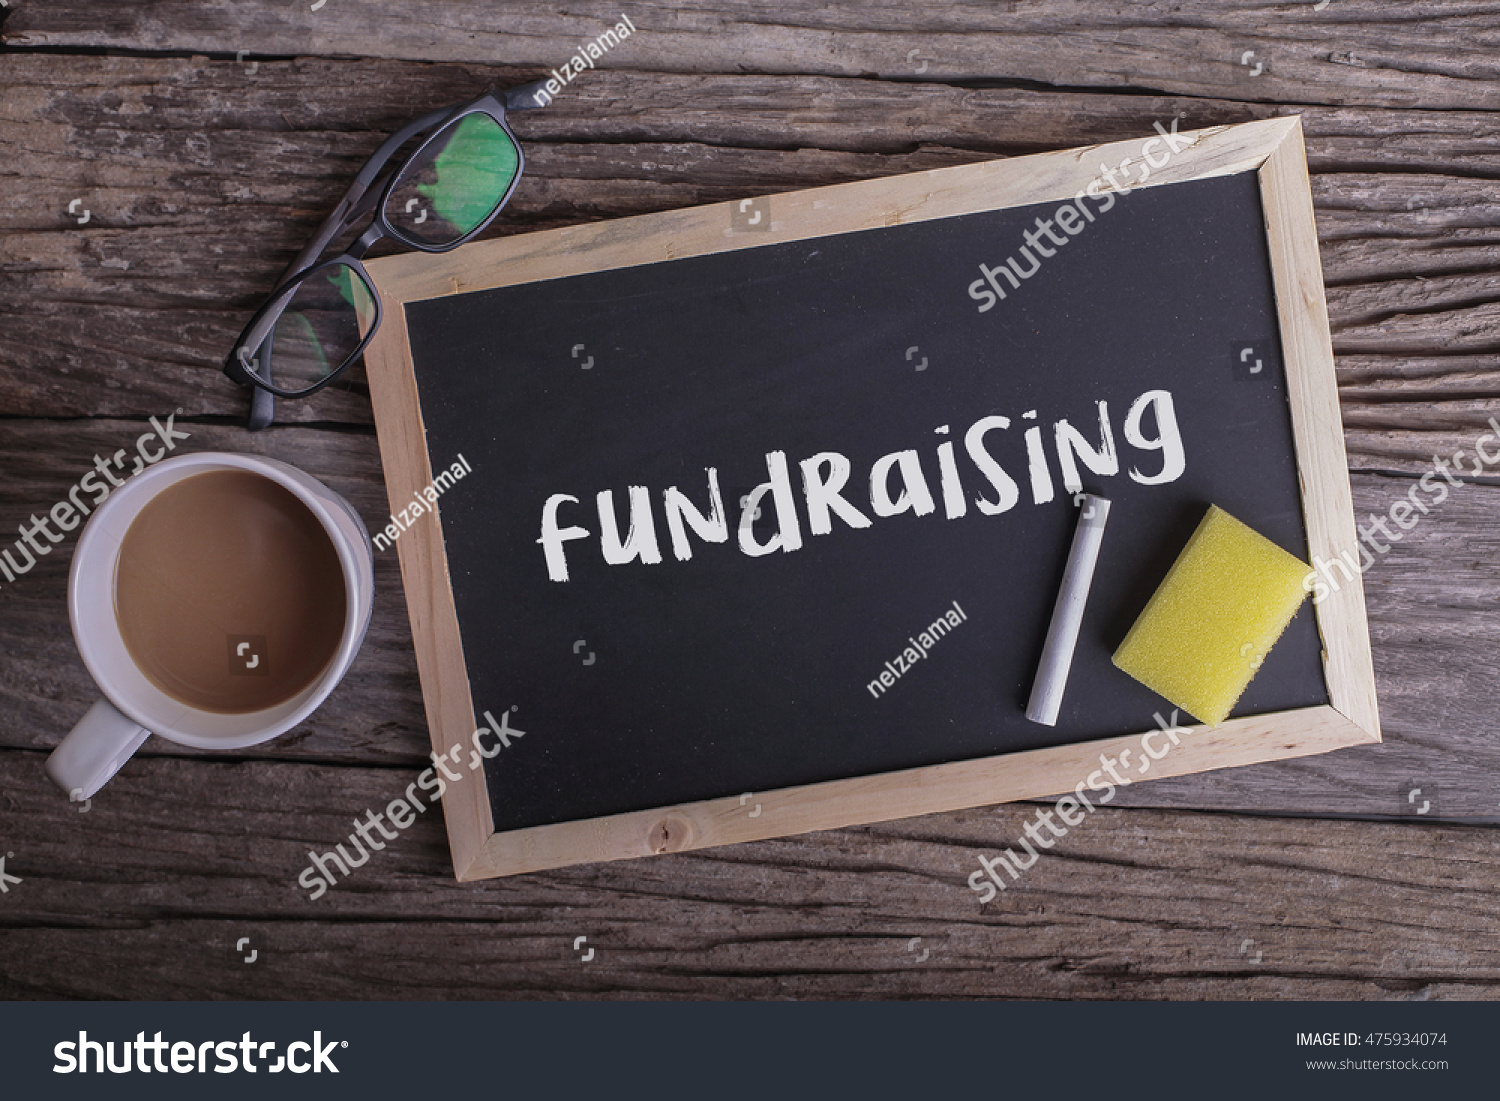 Fundraising On blackboard with cup of coffee, with glasses on wooden background #475934074